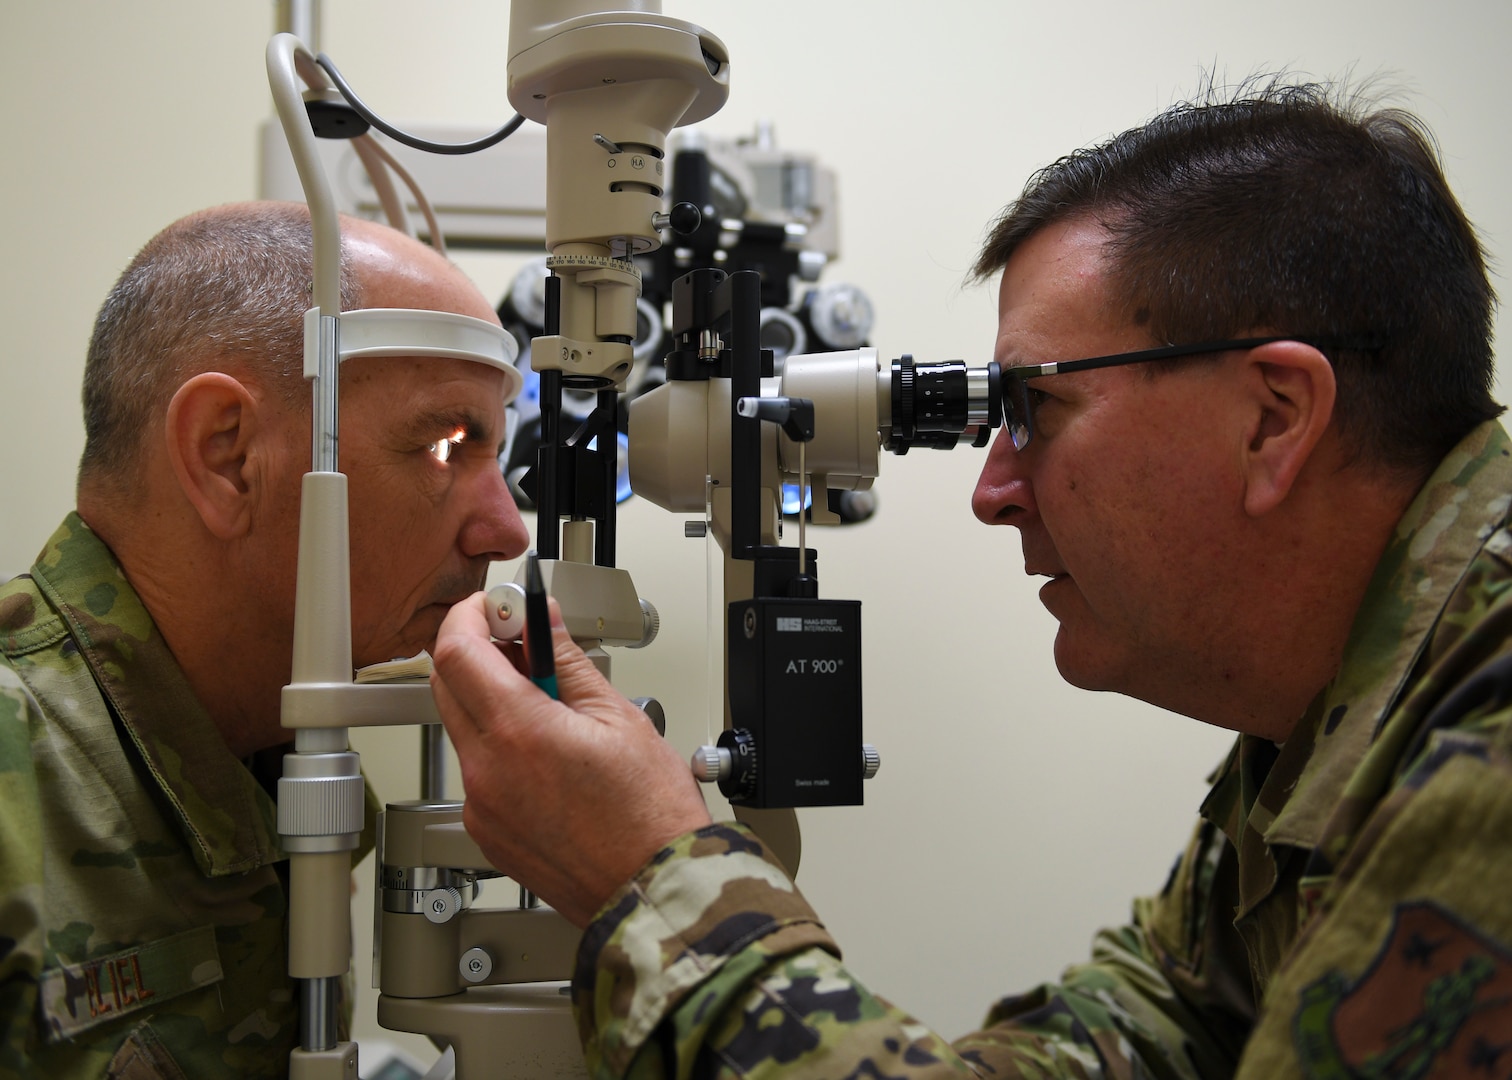 Washington Air National Guard Lt. Col. Robert Forbes, right, 194th Medical Group optometrist, tests Lt. Col. Erik Eliel, 194th Air Support Operations Group director of operations, vision during a 194th Medical Group periodic health assessment rodeo, Camp Murray, Wash., May 4, 2019. The PHA rodeo meets requirements to maintain an Airman’s deployable status by giving immunizations, blood lab draws, HIV screening, and health assessment questionnaires.